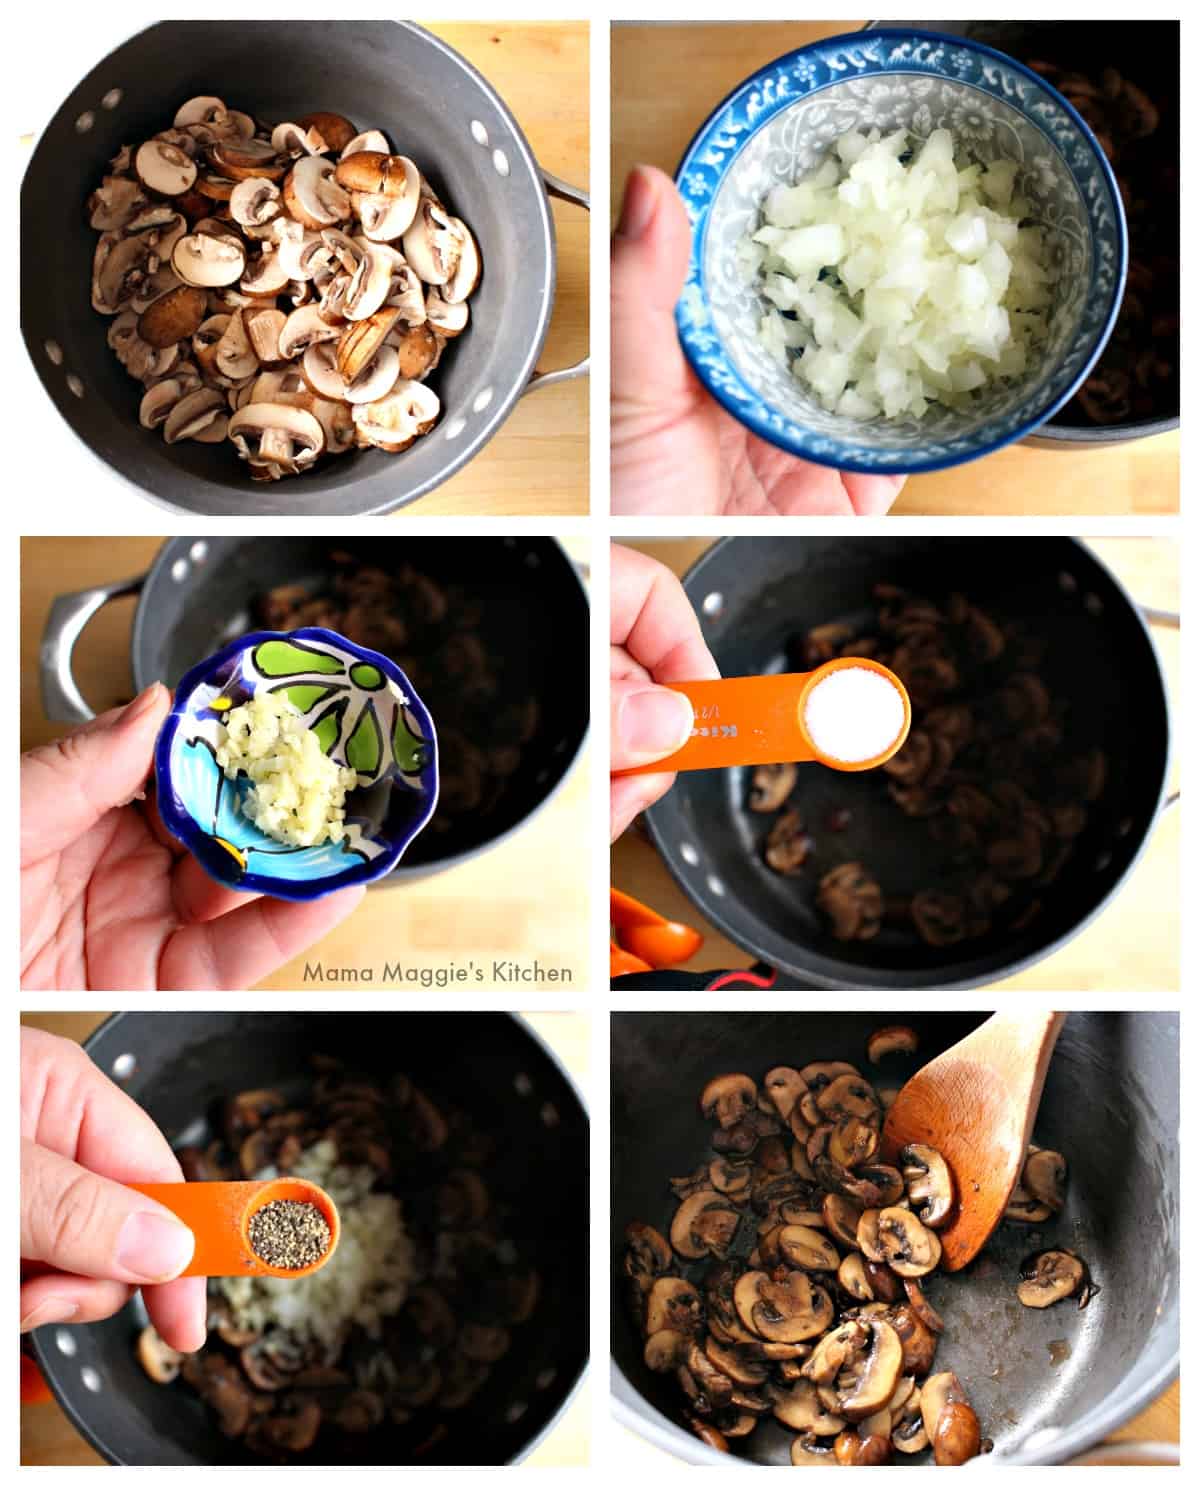 A collage showing how to make the mushroom mixture.